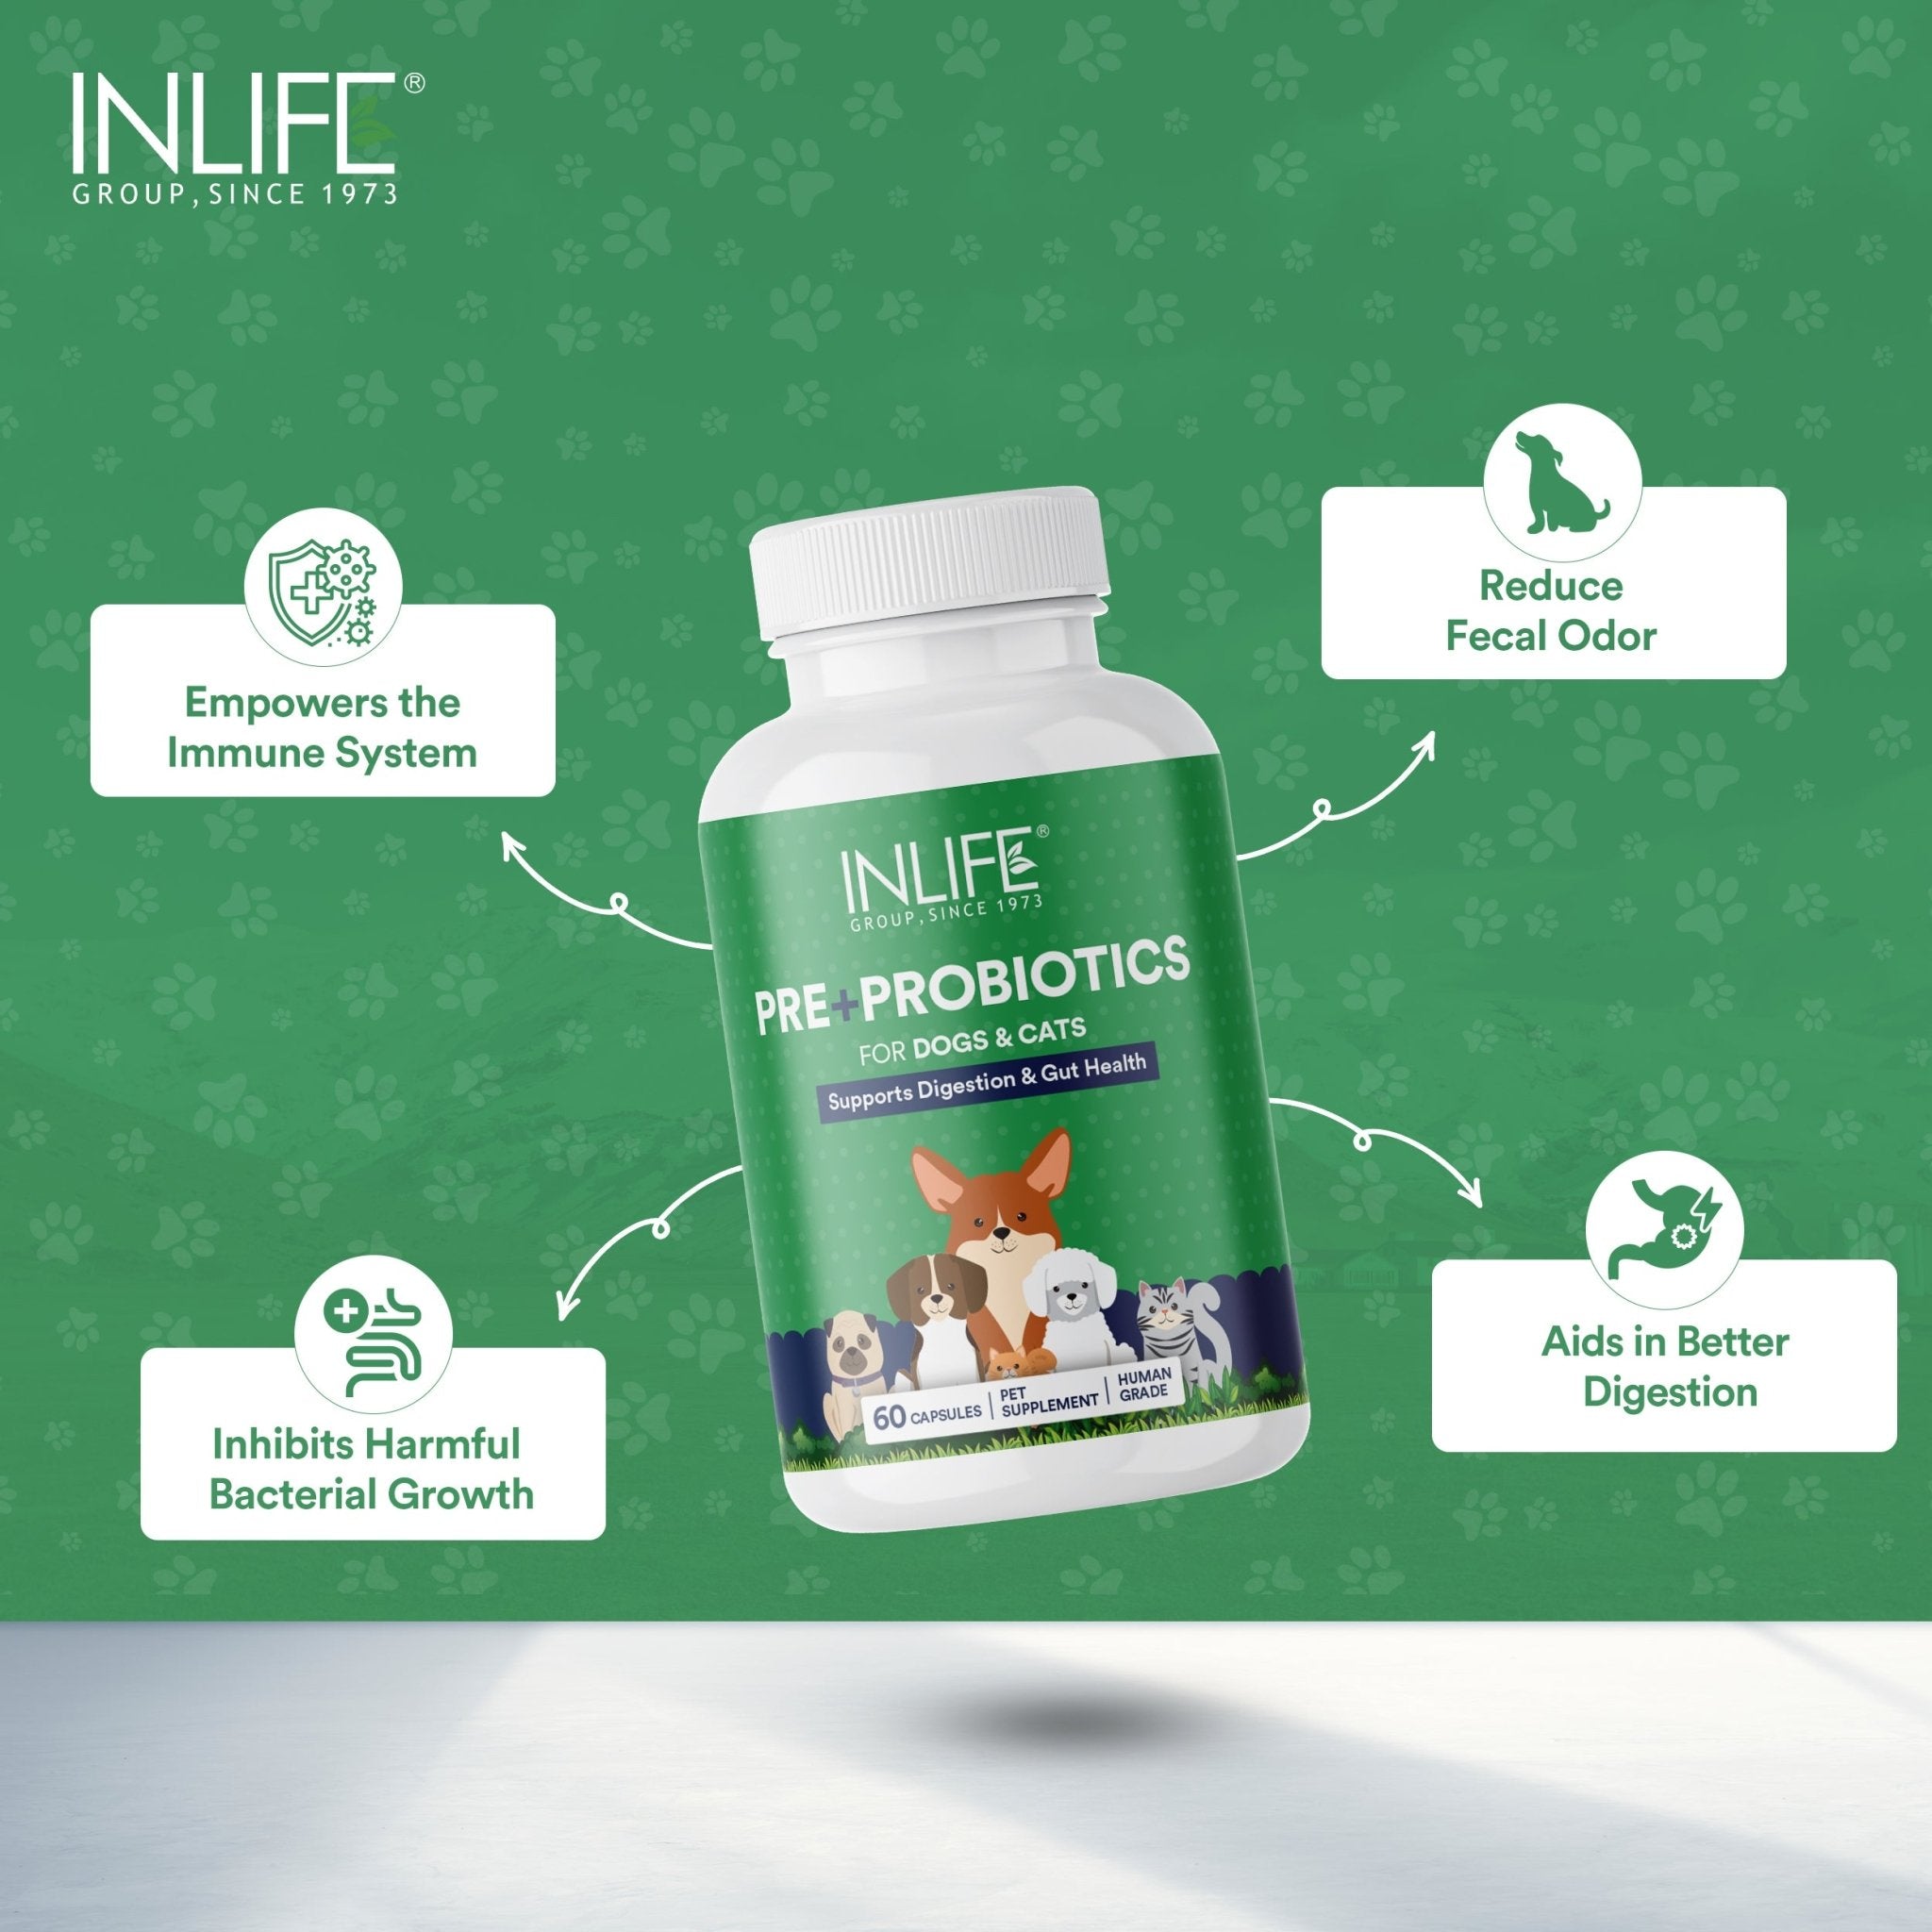 INLIFE Prebiotics & Probiotics for Dogs Cats Pets | Supplements for Gut Health | Lactobacillus Bacteria for Digestive Health | Immunity - 60 Capsules - Inlife Pharma Private Limited